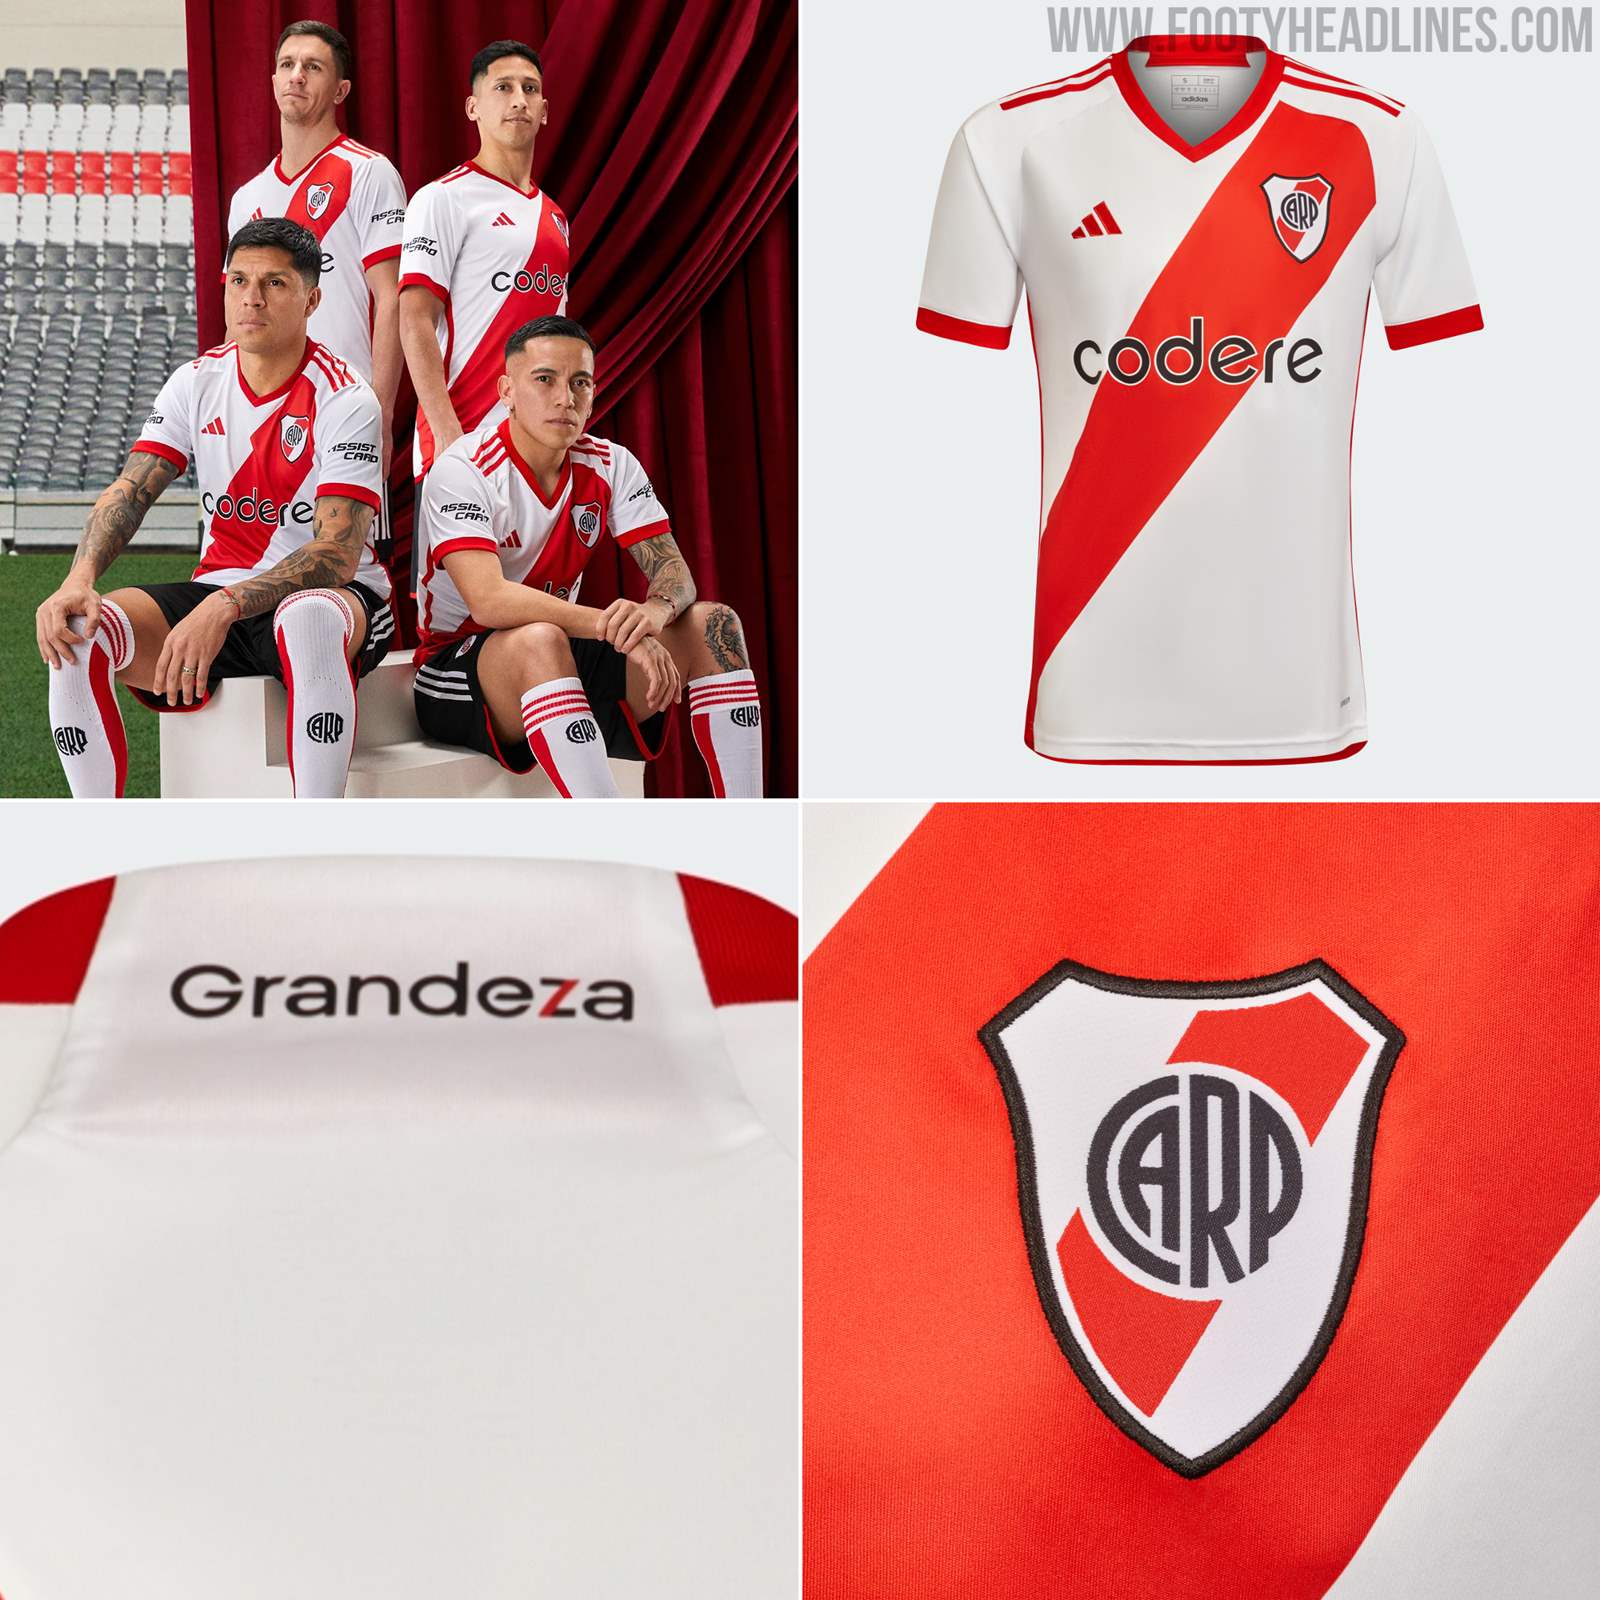 River Plate 23-24 Home Kit Released - Footy Headlines